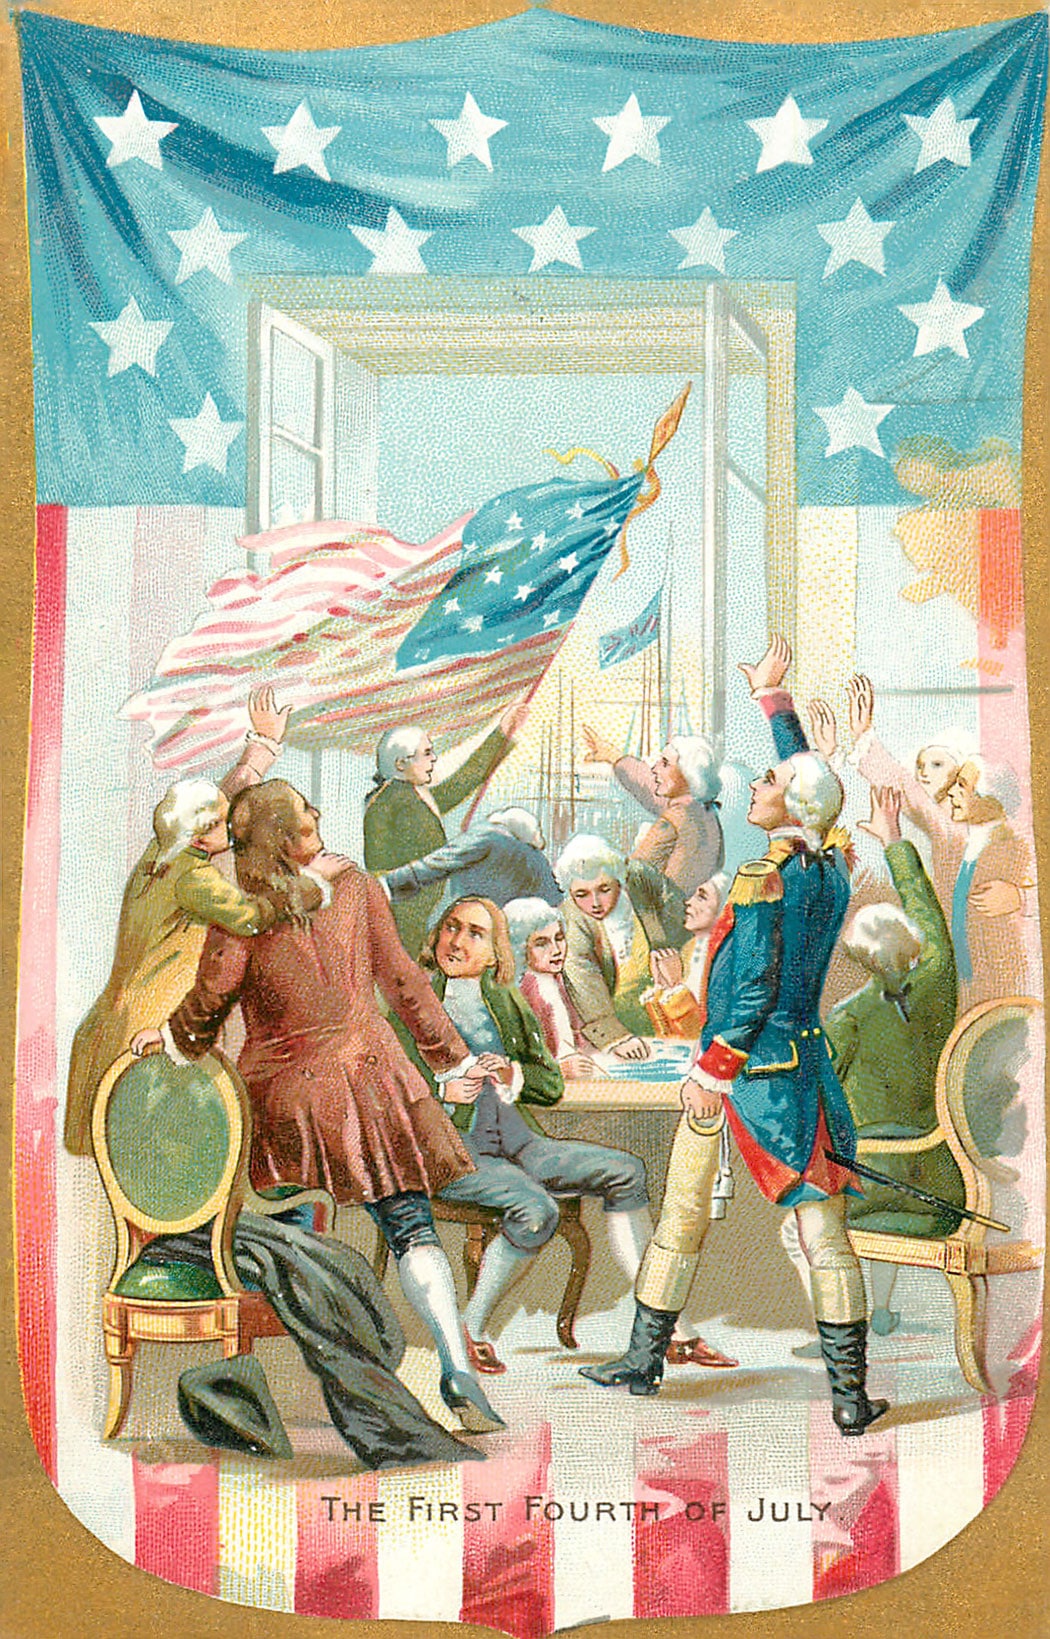 vintage 4th of July postcard - image of first 4th of July